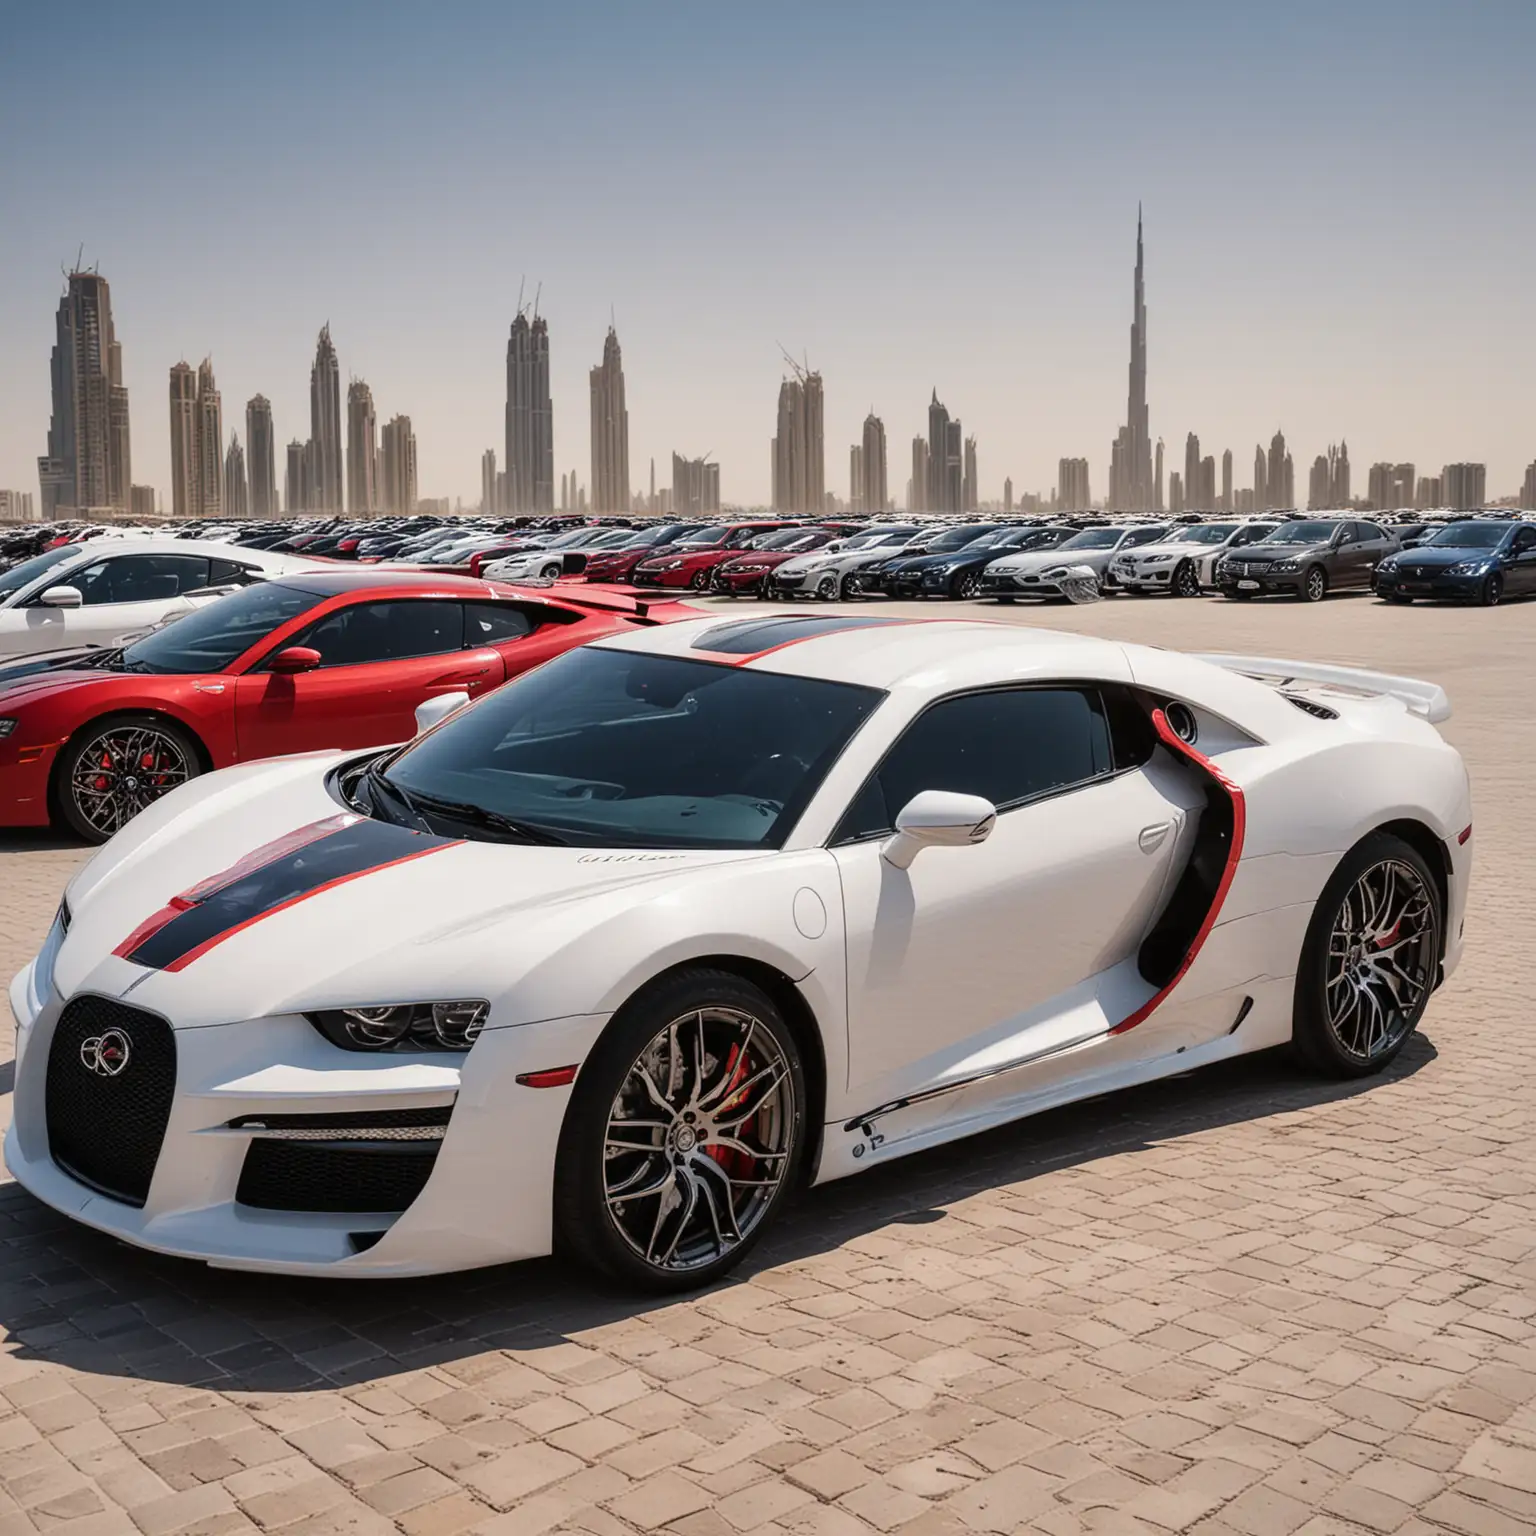 Luxury Cars Driving through the Urban Landscapes of UAE